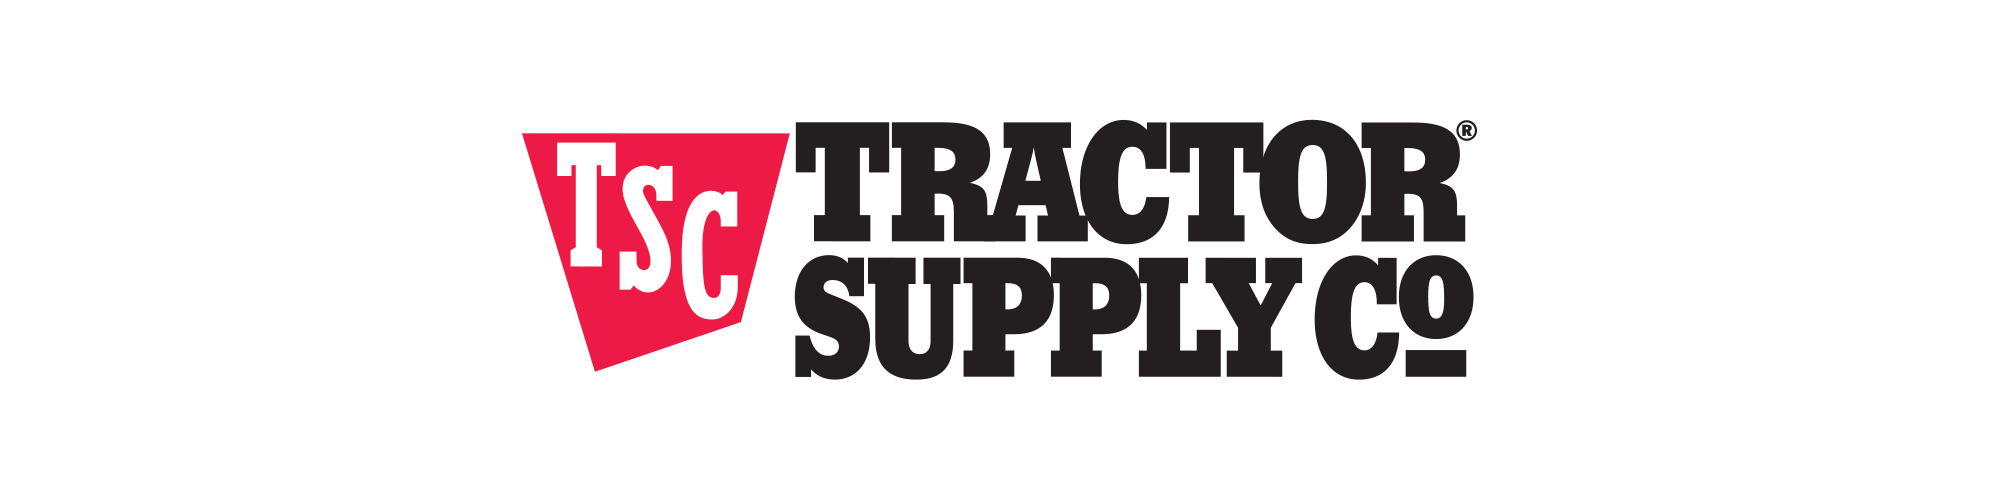 Tractor Supply Co logo.